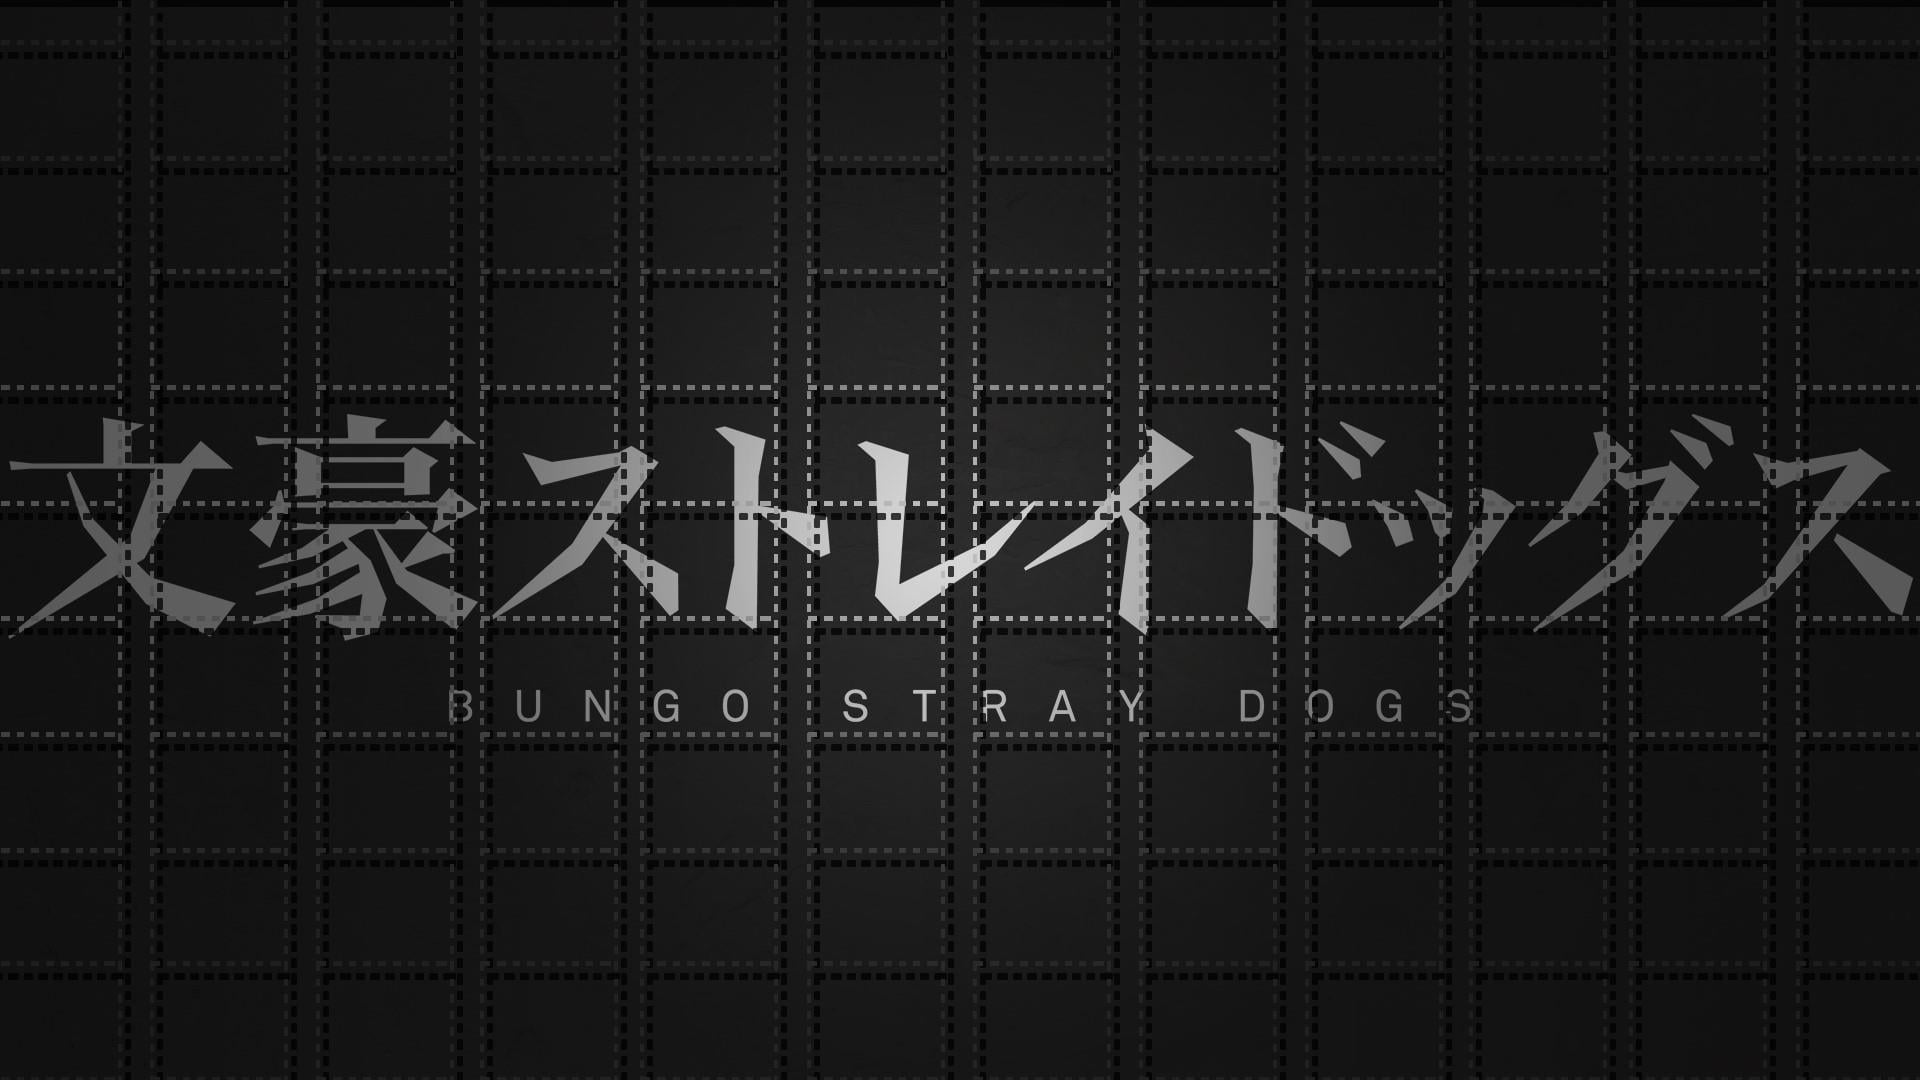 bungo stray dogs, anime, metal, pattern, no people, text, full frame